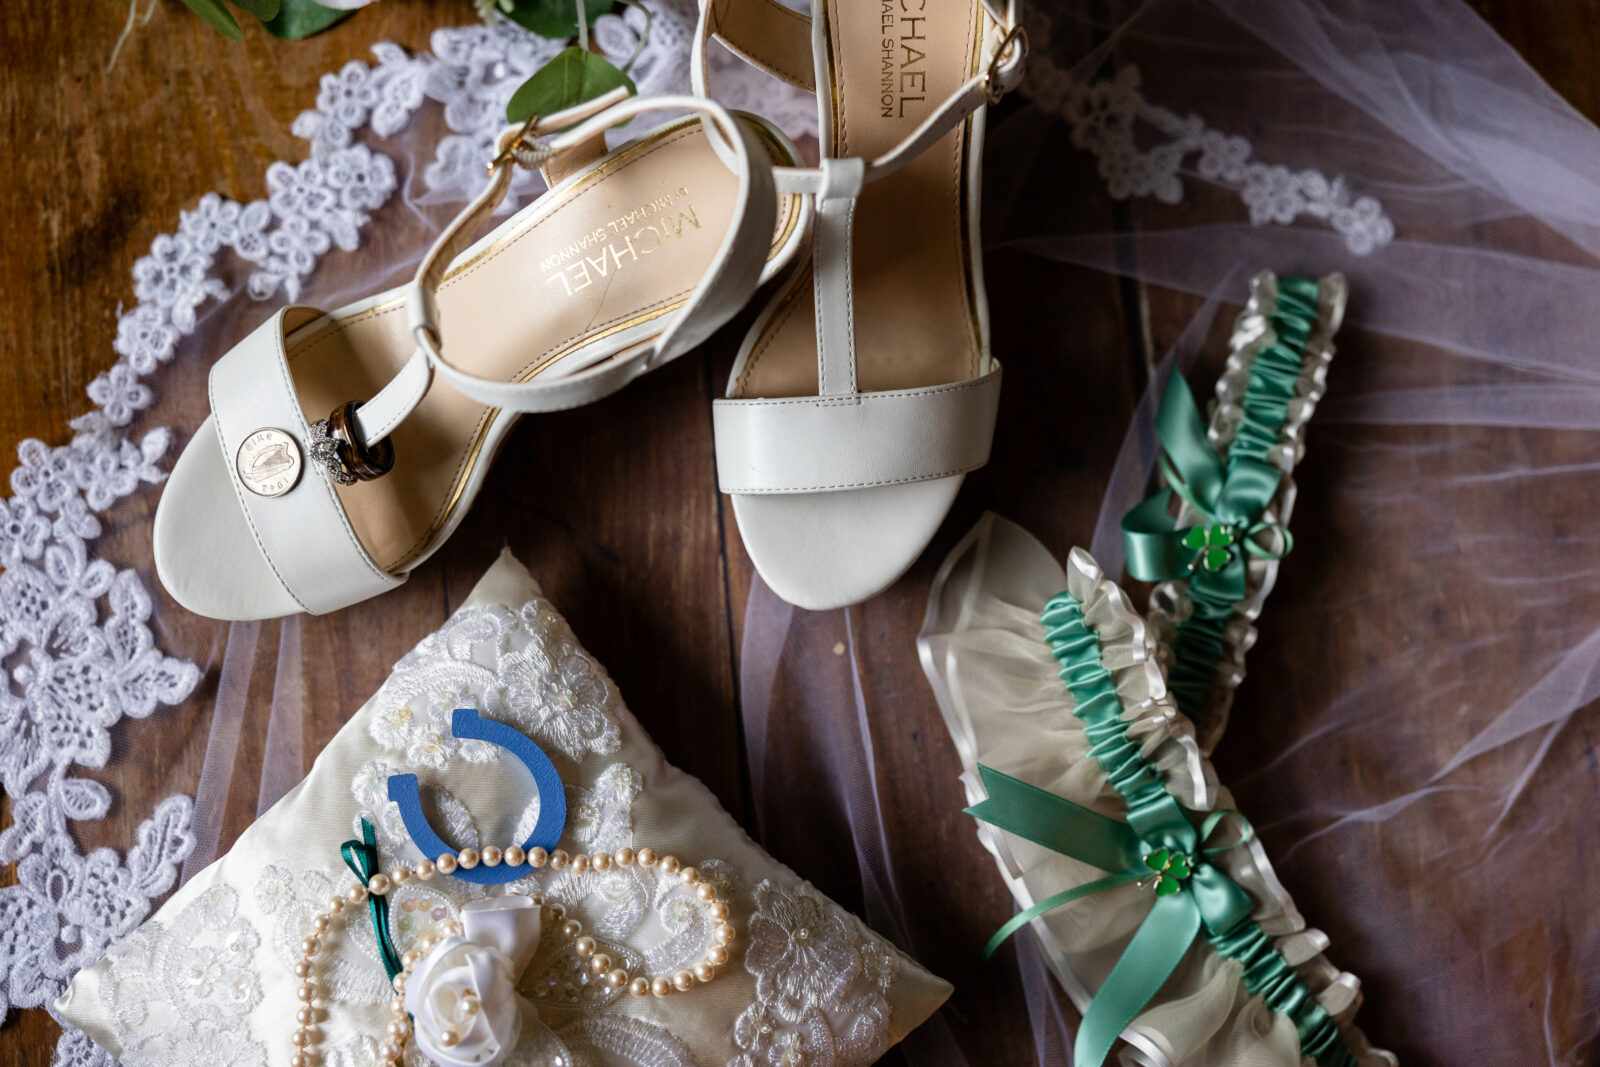 Top down photo of brides shoes with half pence, st patty's day themed wedding, green garter belt, ringbearer pillow, lace detailed veil, and vintage engagement ring